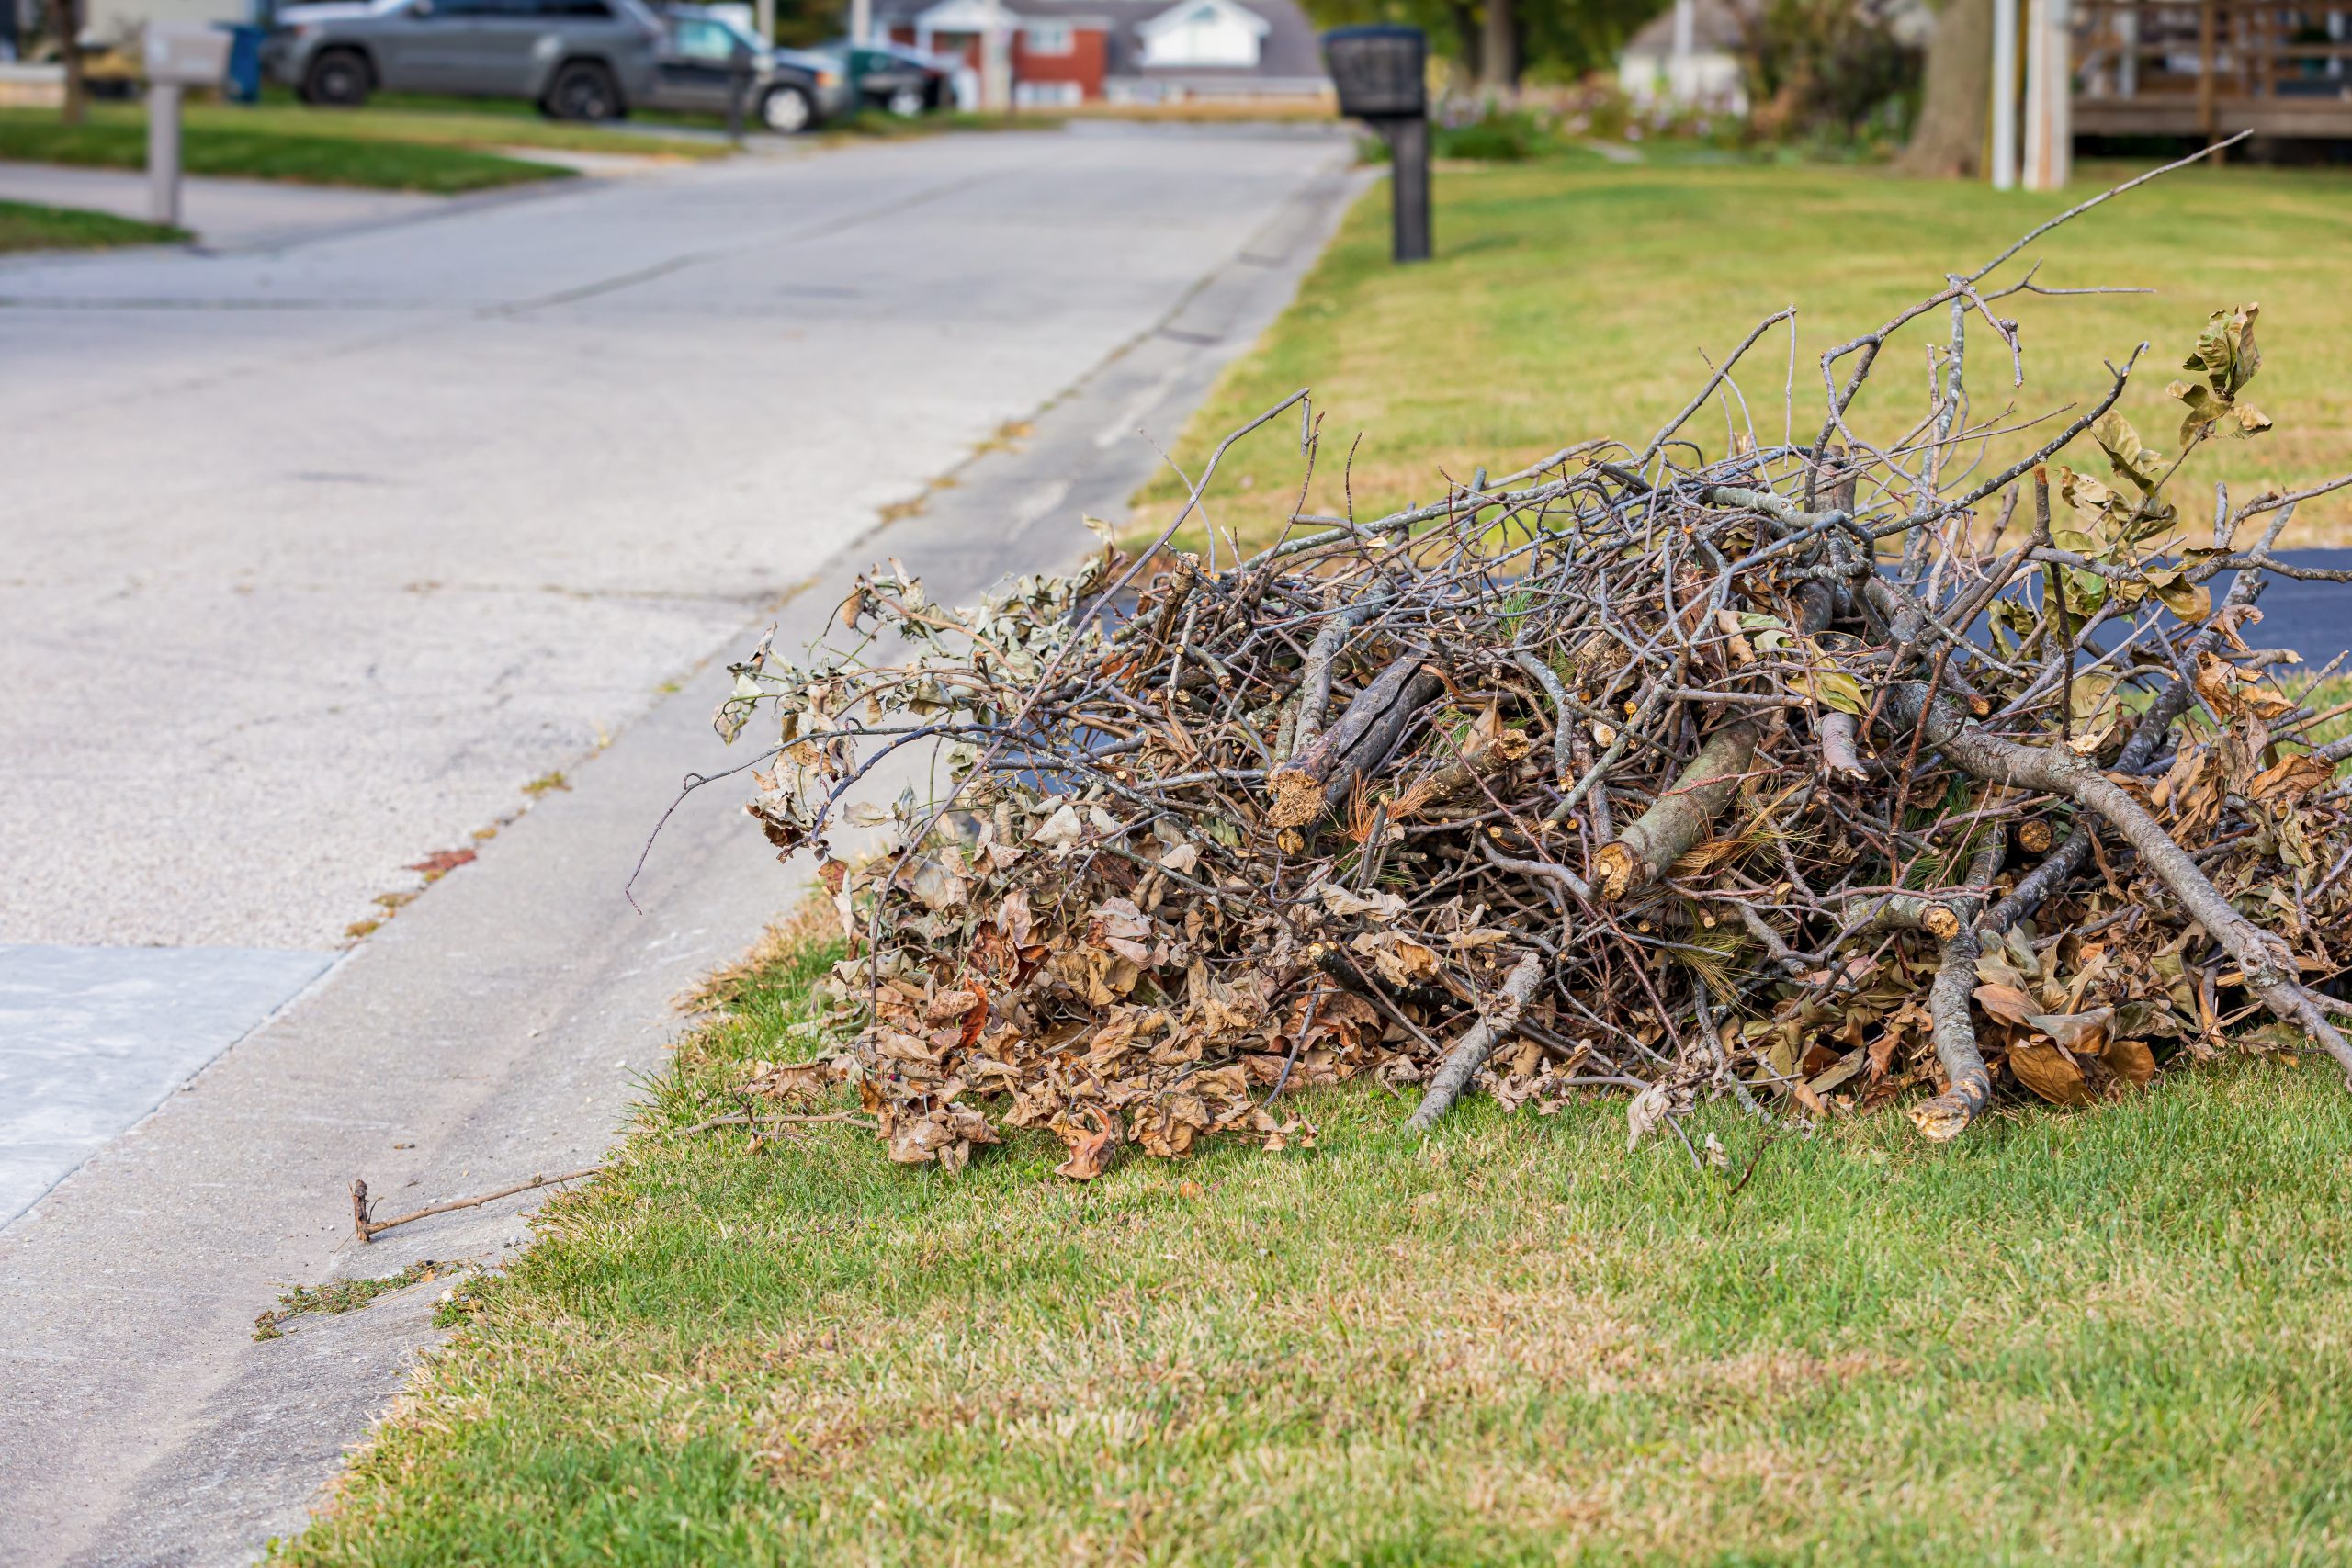 Can The Junk Guys remove yard waste from hard-to-reach areas of my property? - faq - The Junk Guys